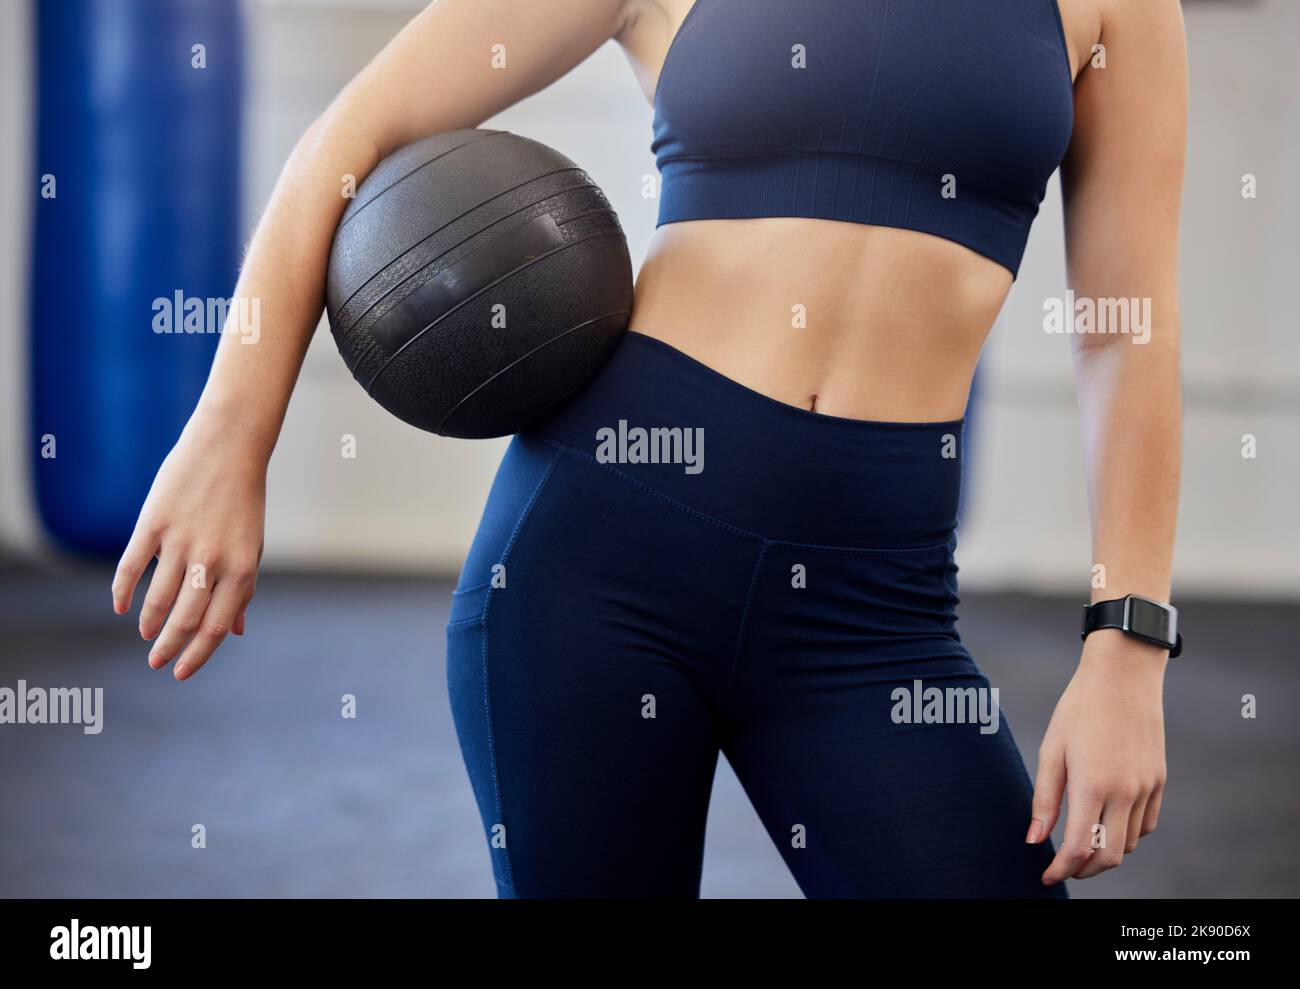 Woman, fitness and medicine ball for exercise, workout or training in a gym for a healthy, wellness and strong body. Athlete with equipment or gear Stock Photo